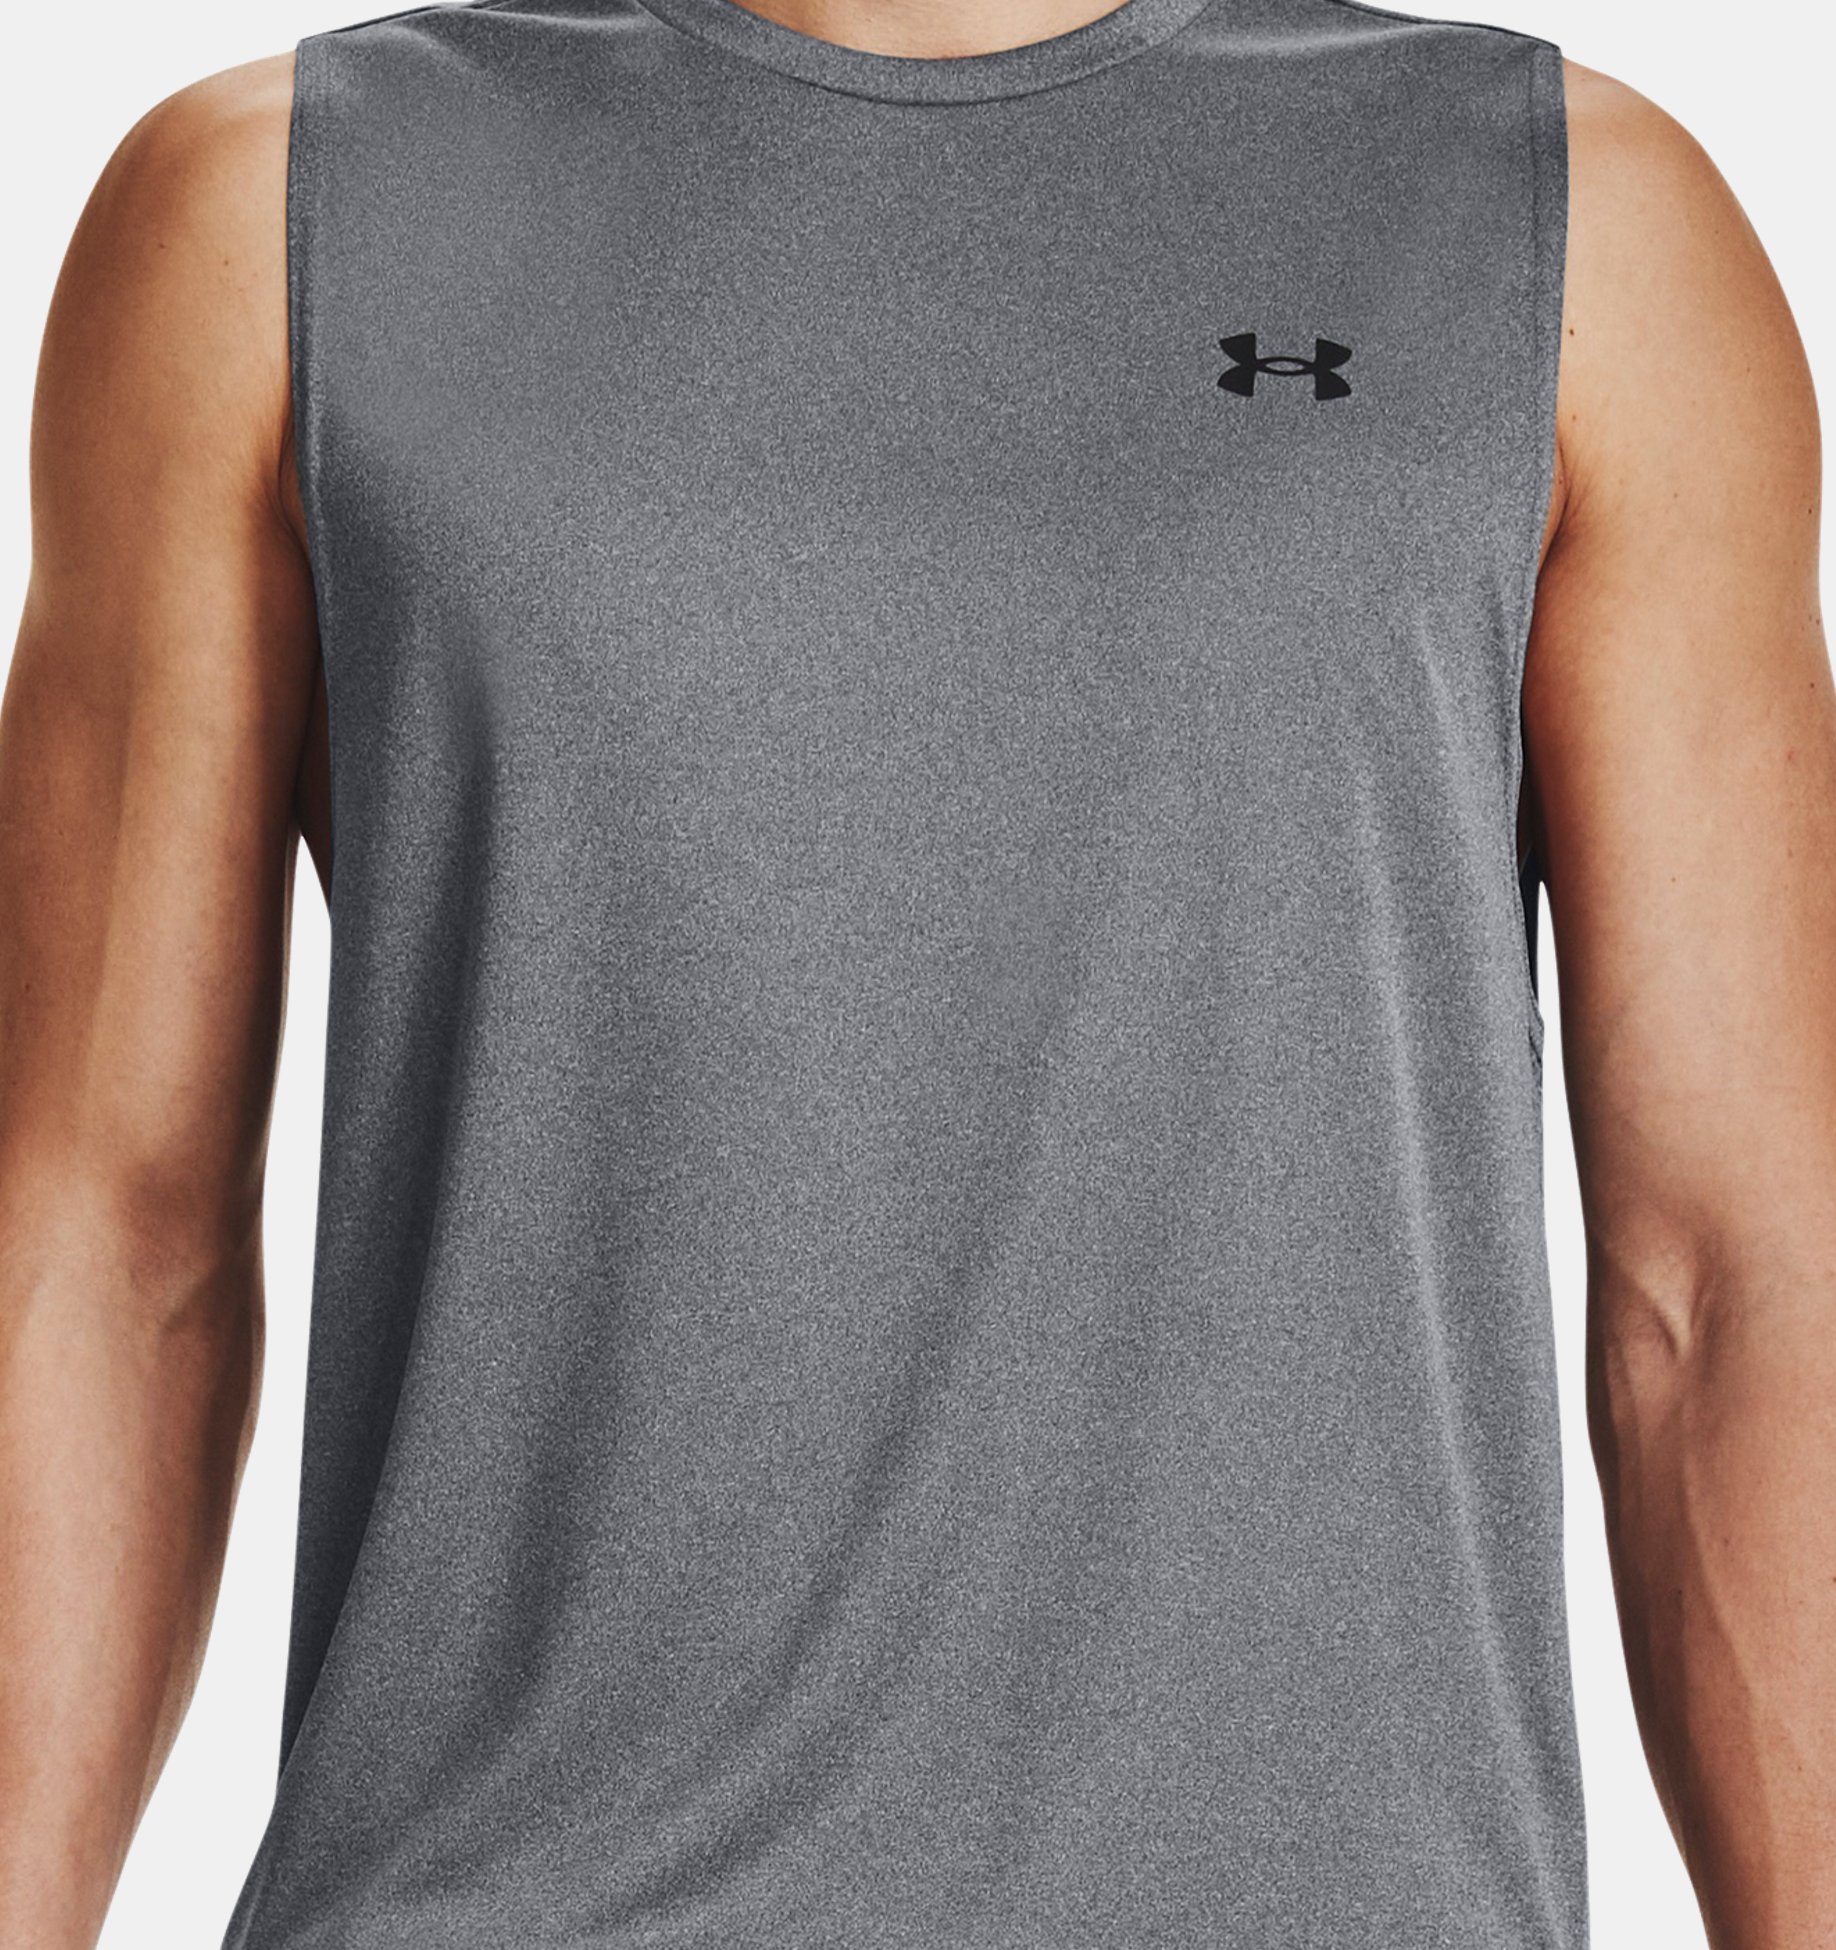 Under Armour Men’s UA Tees on sale for $12.97